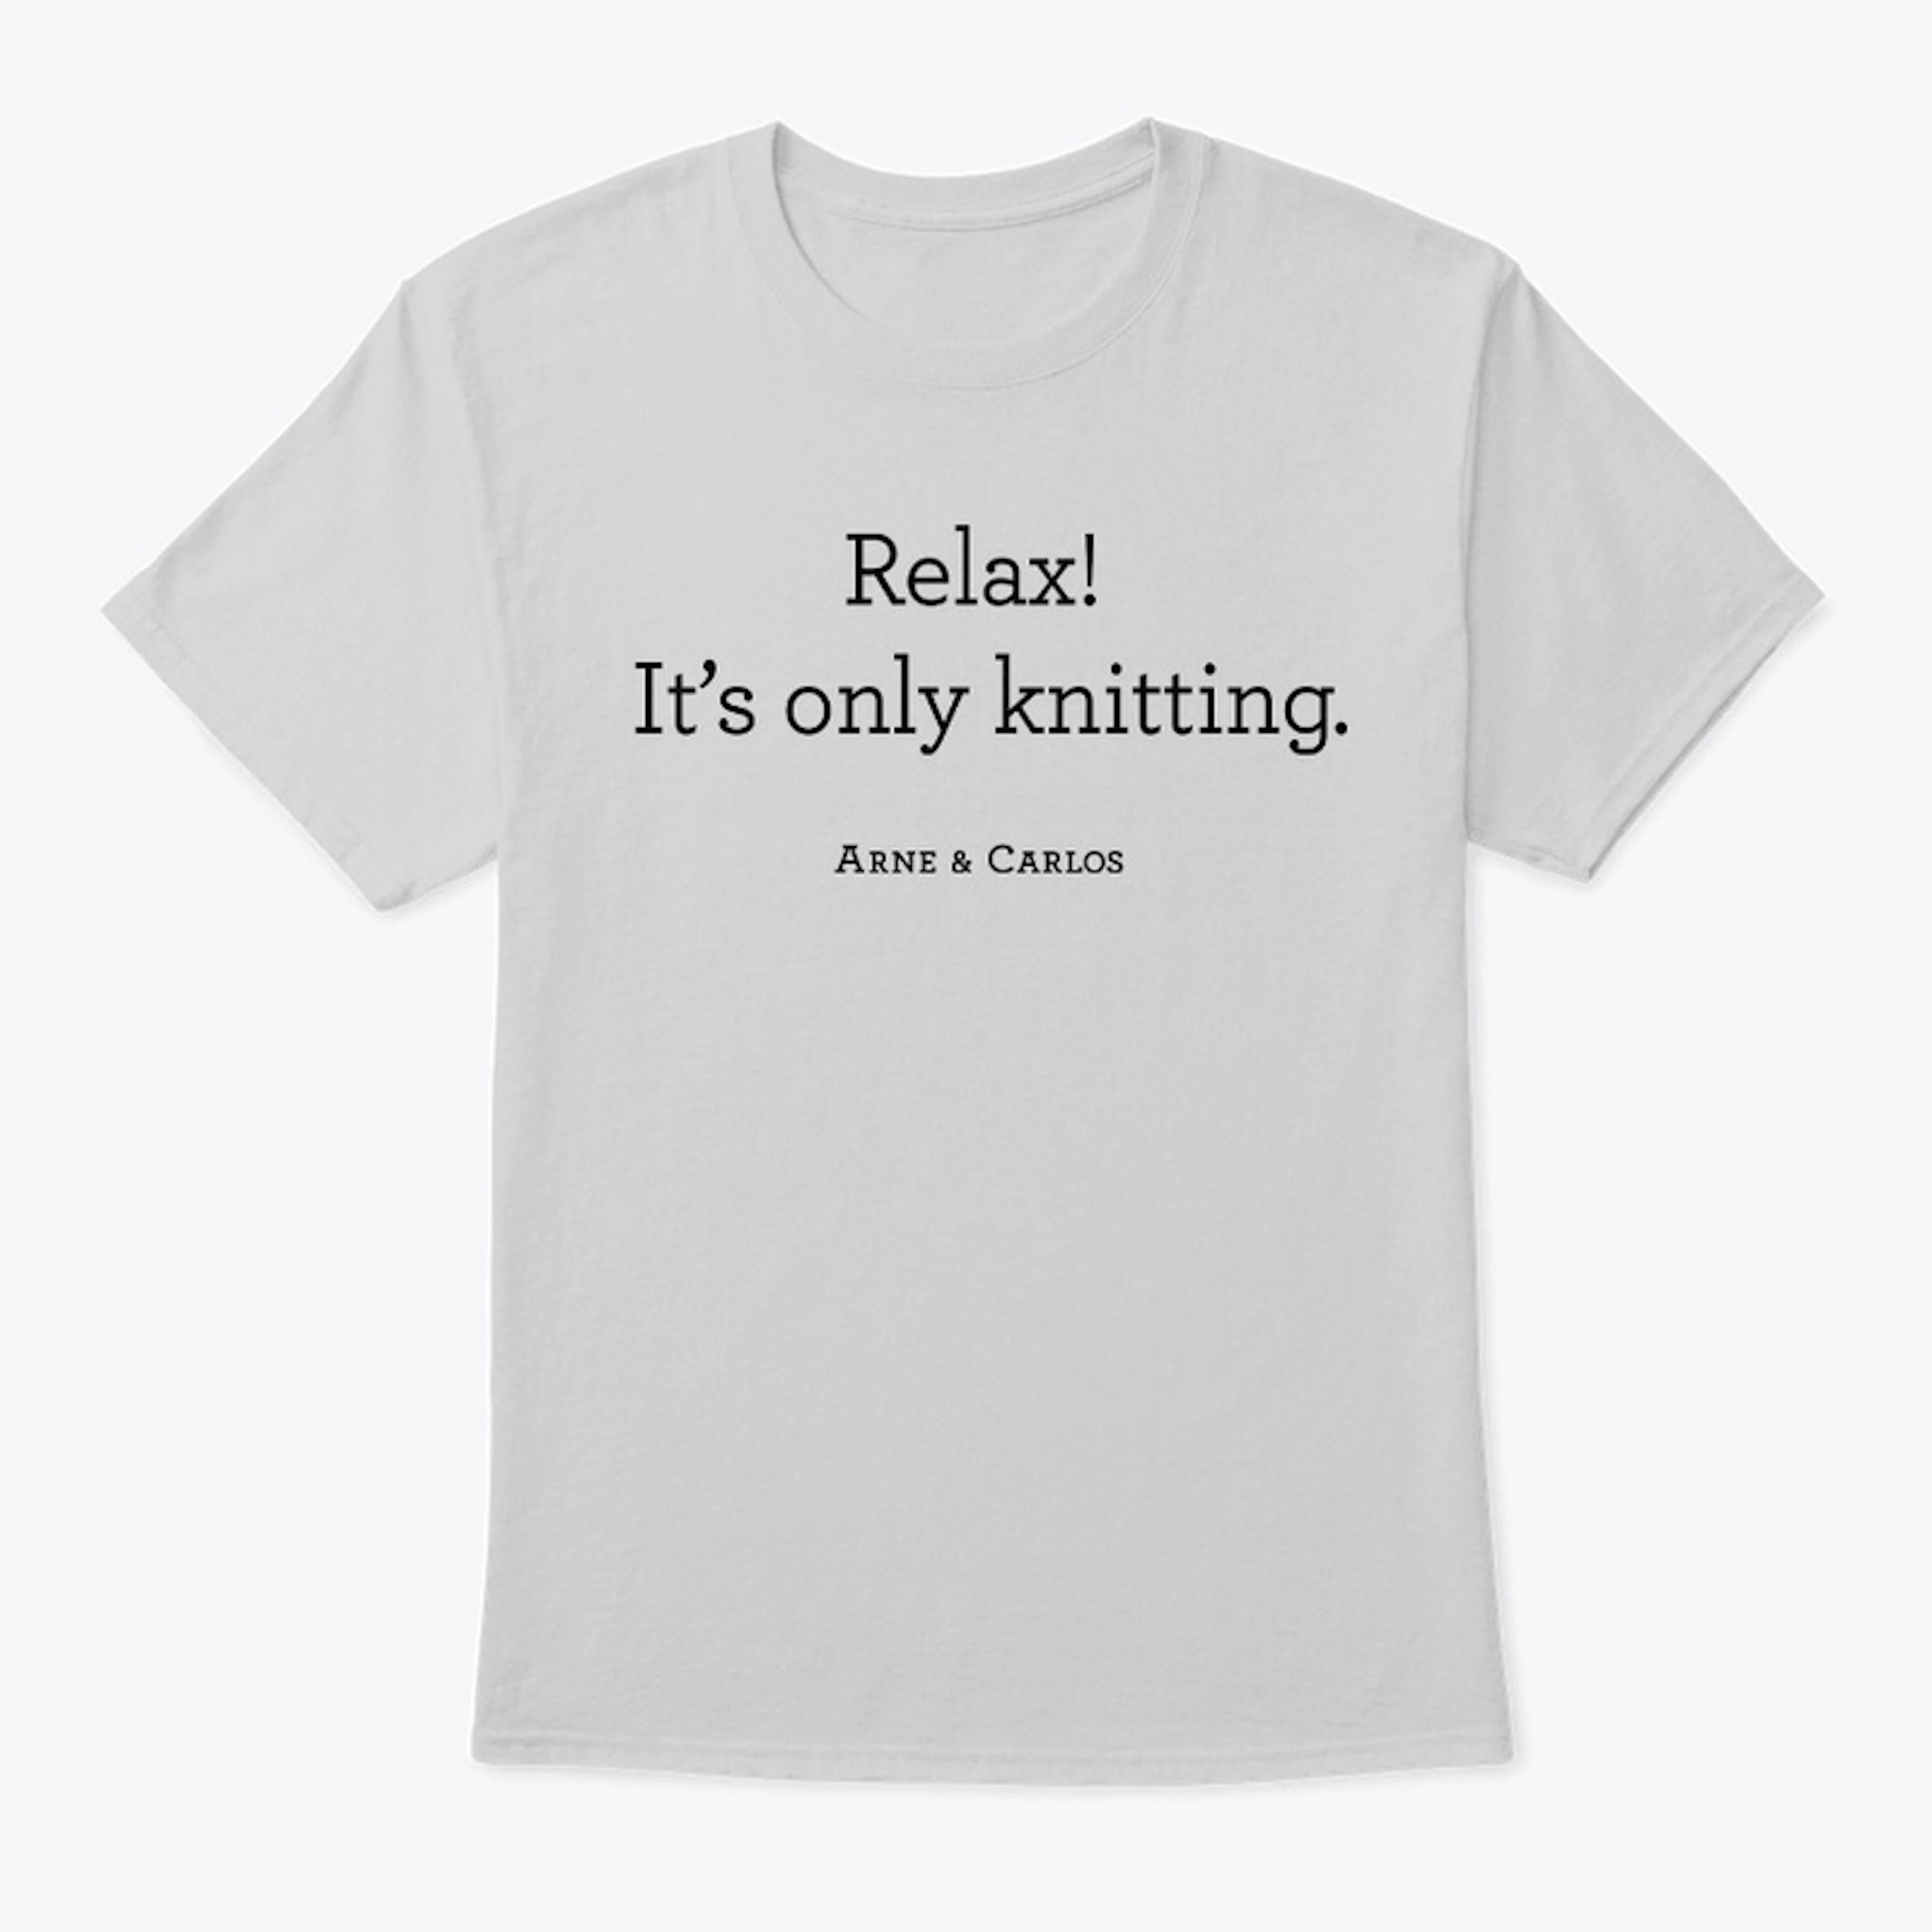 Relax! It's only knitting. 